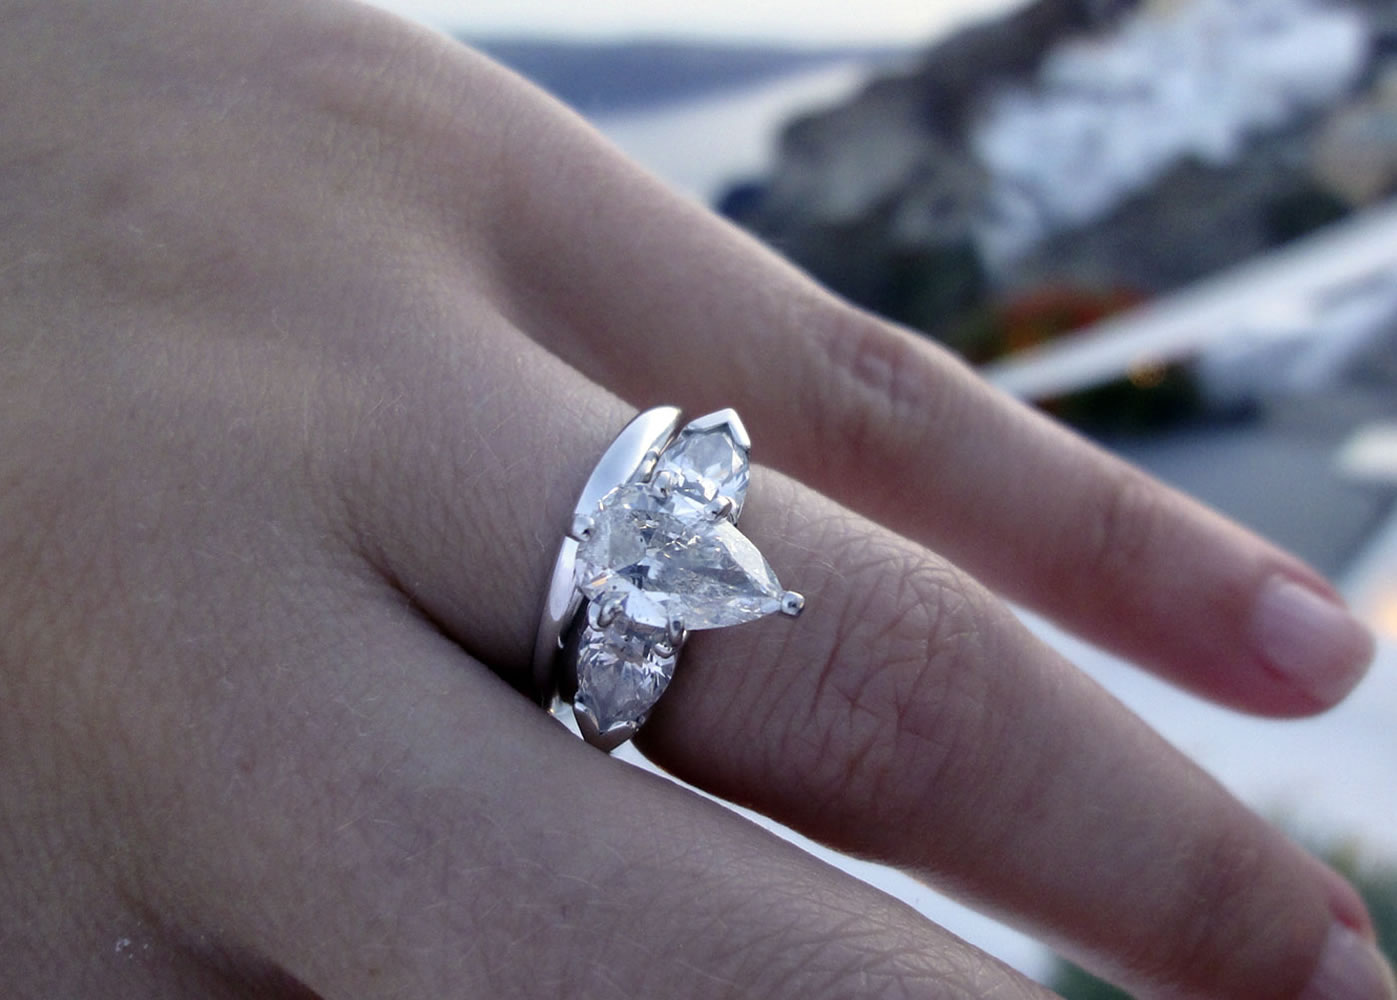 If you are in the market for an engagement ring, it is important to know what you are looking at.